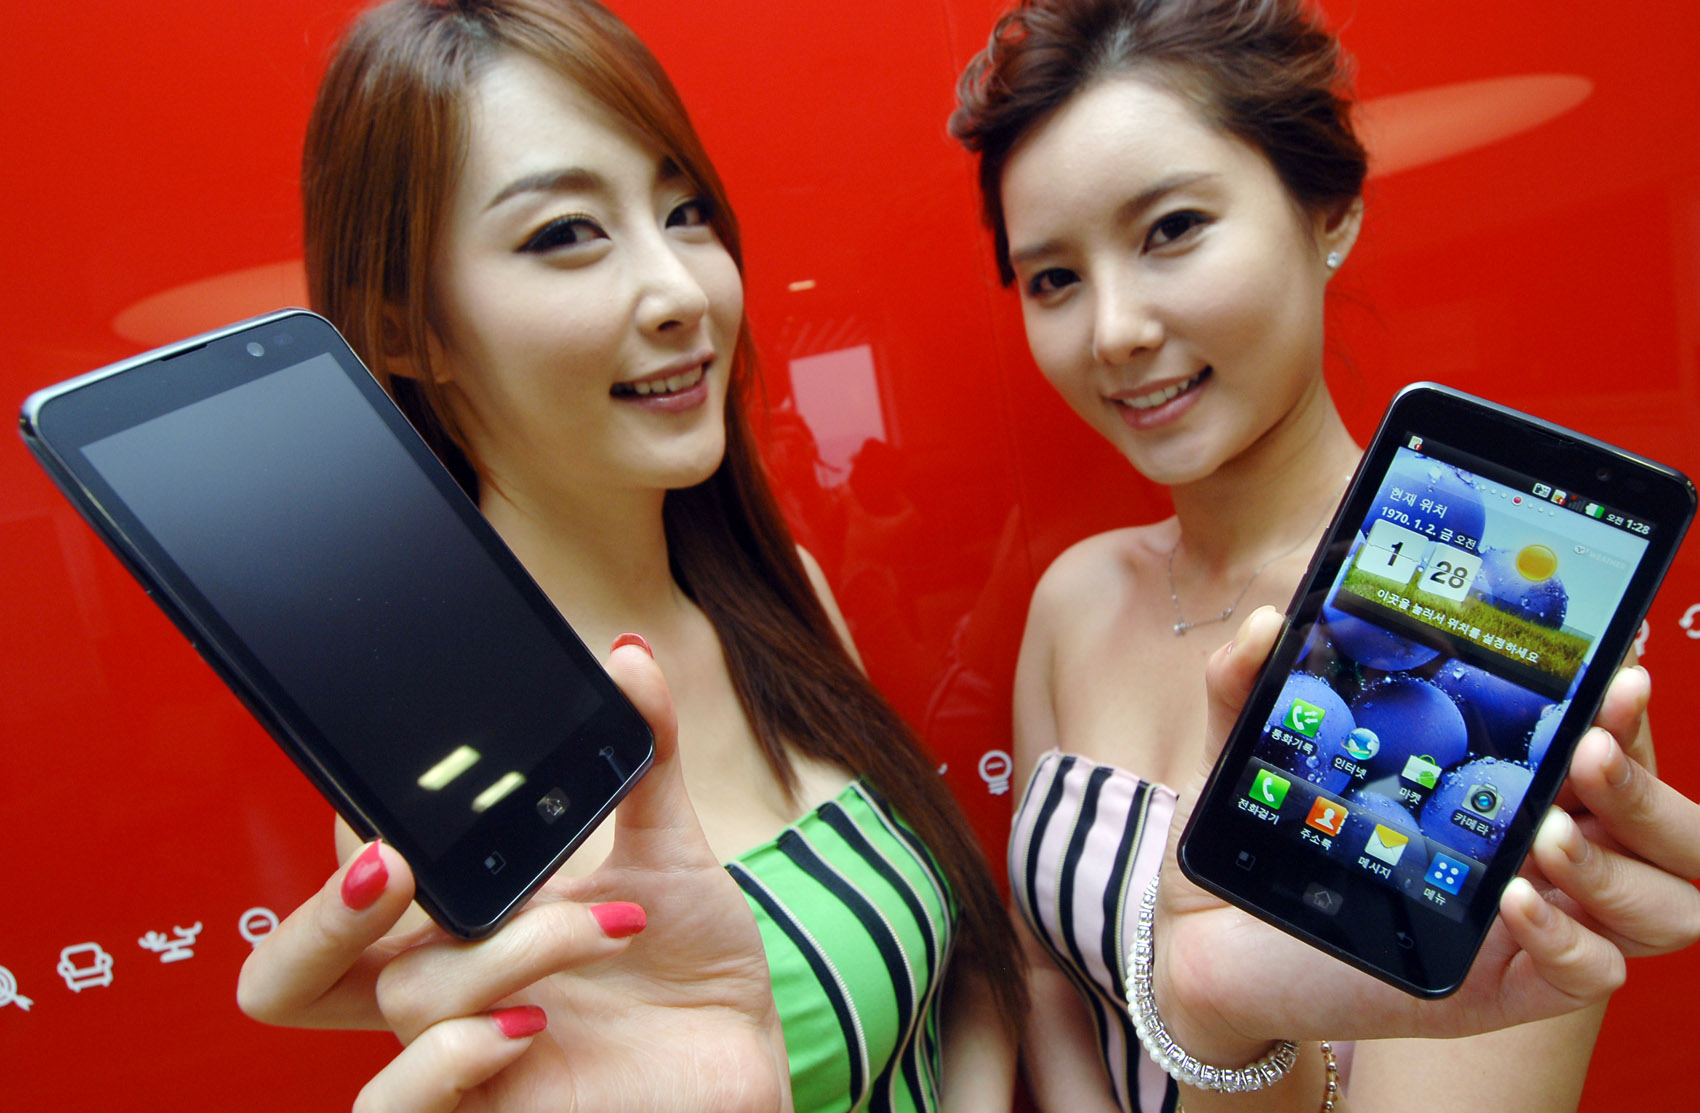 Two female models hold LG Optimus LTE and show its front views